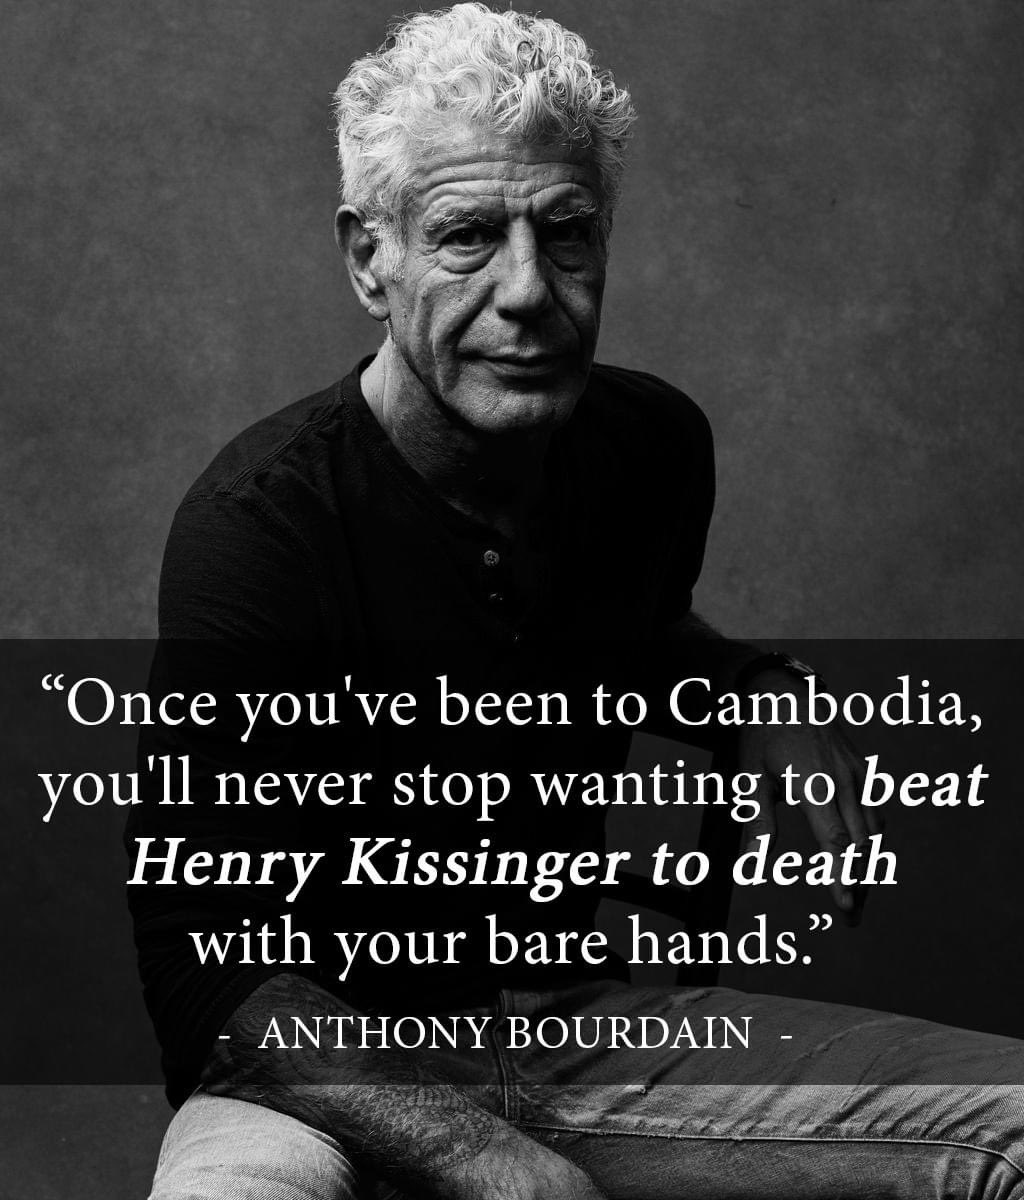 Kissinger is trending, so it’s time to tweet this immortal quote on Henry Kissinger, written by Anthony Bourdain in 2001.